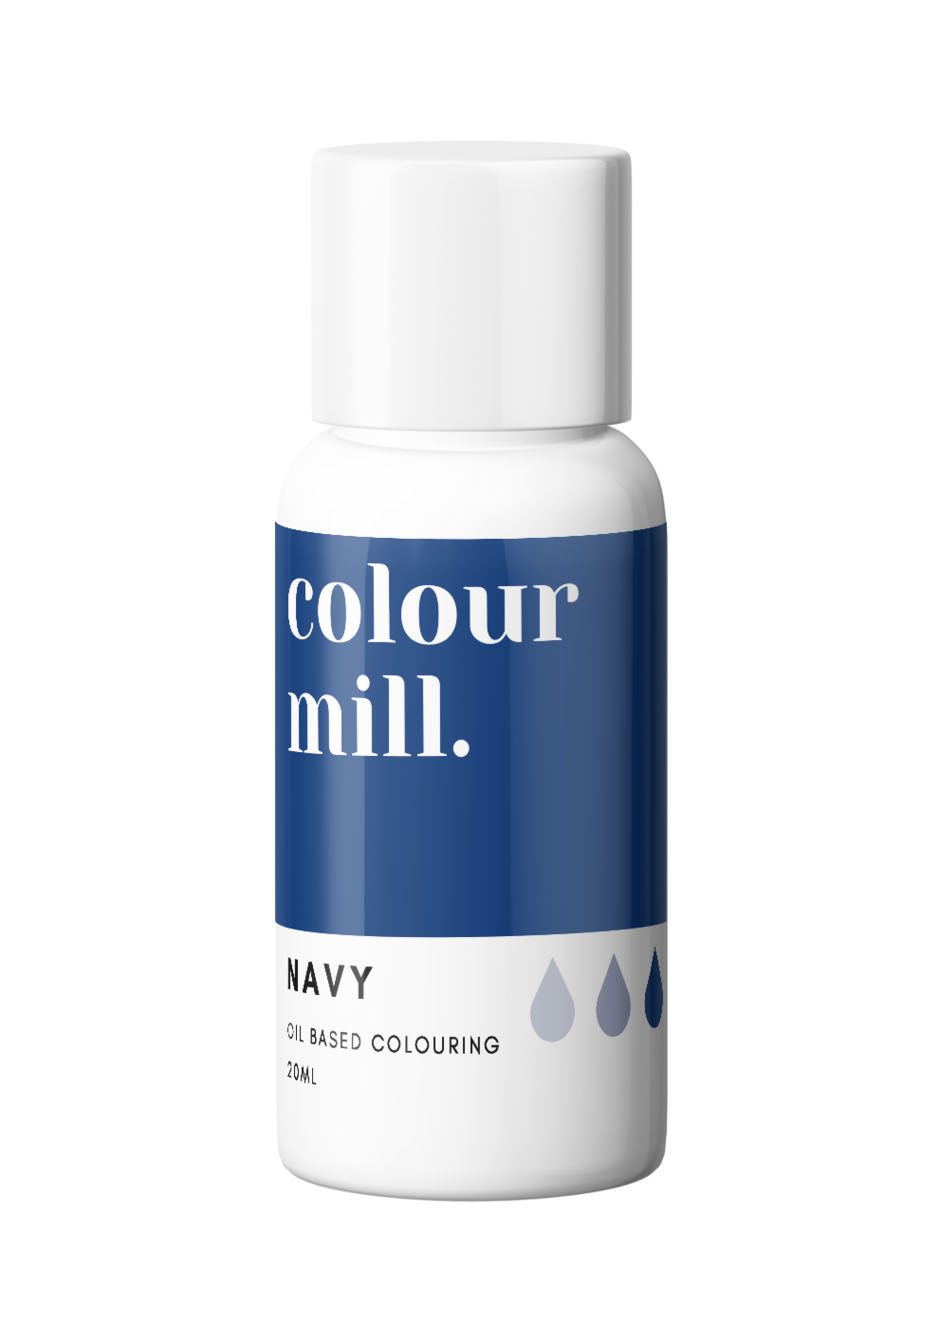 Colour Mill Navy Colouring 20ml